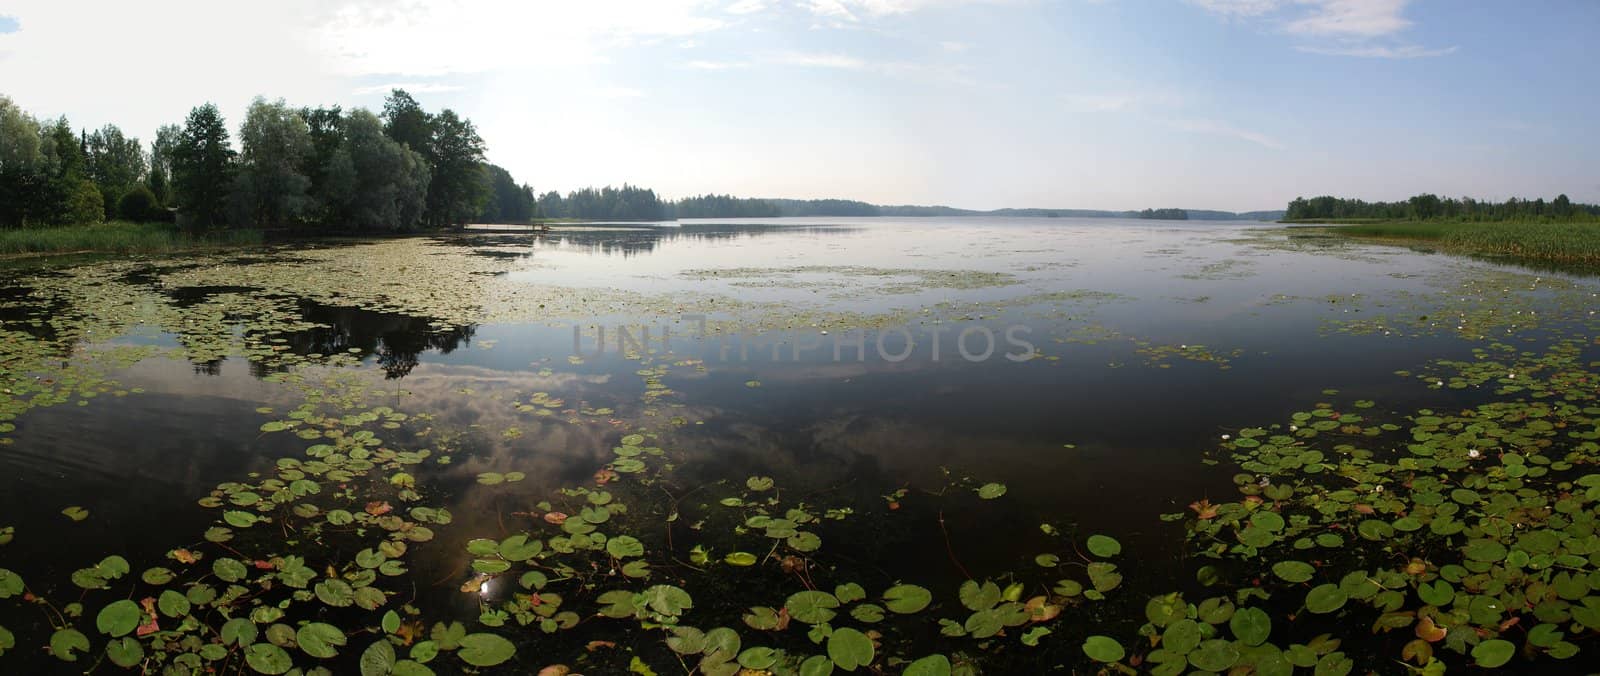 Beutyful lakes and forests of Uusimaa region in Finland by dariya64